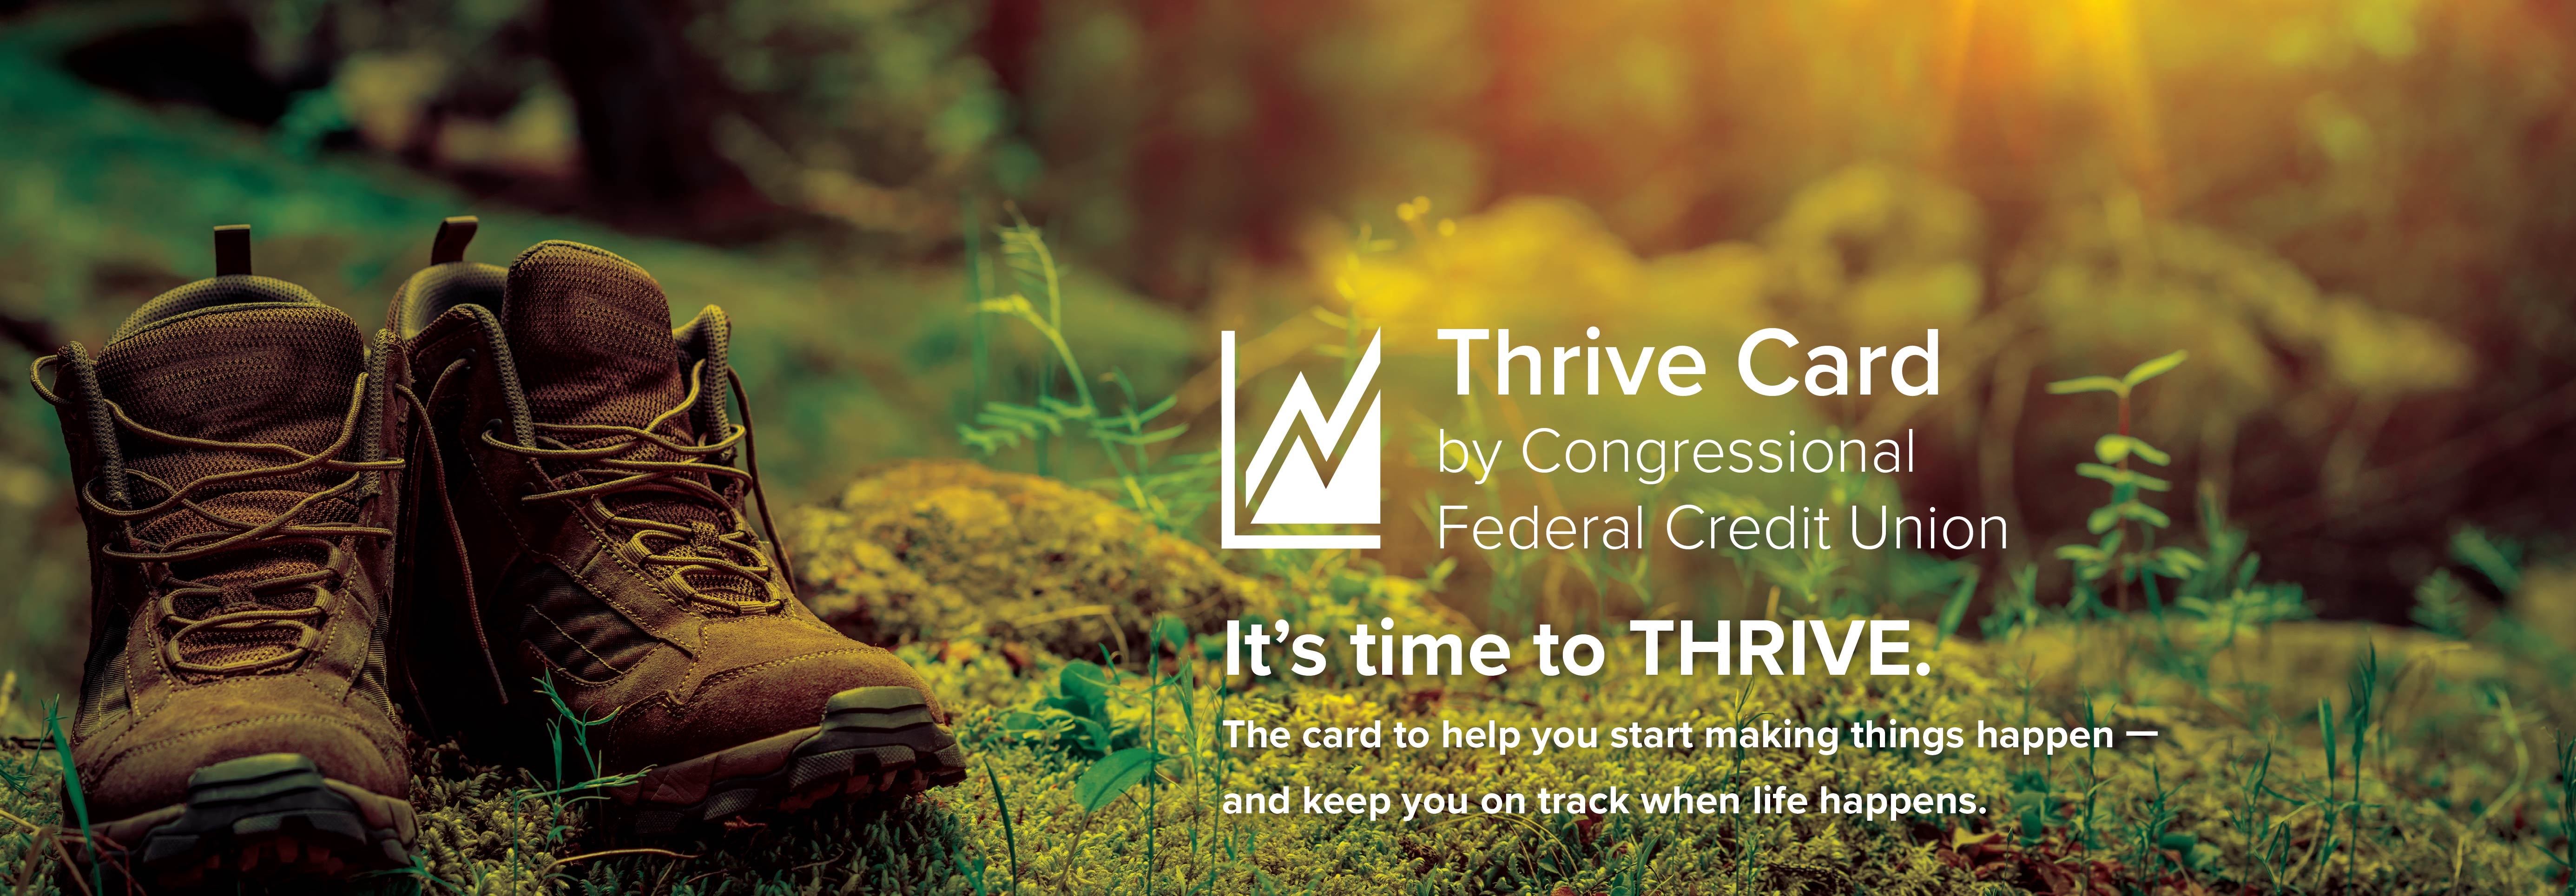 Thrive card by Congressional Federal Credit Union: It's time to Thrive. The card to help you start making things happen - and keep you on track when life happens.